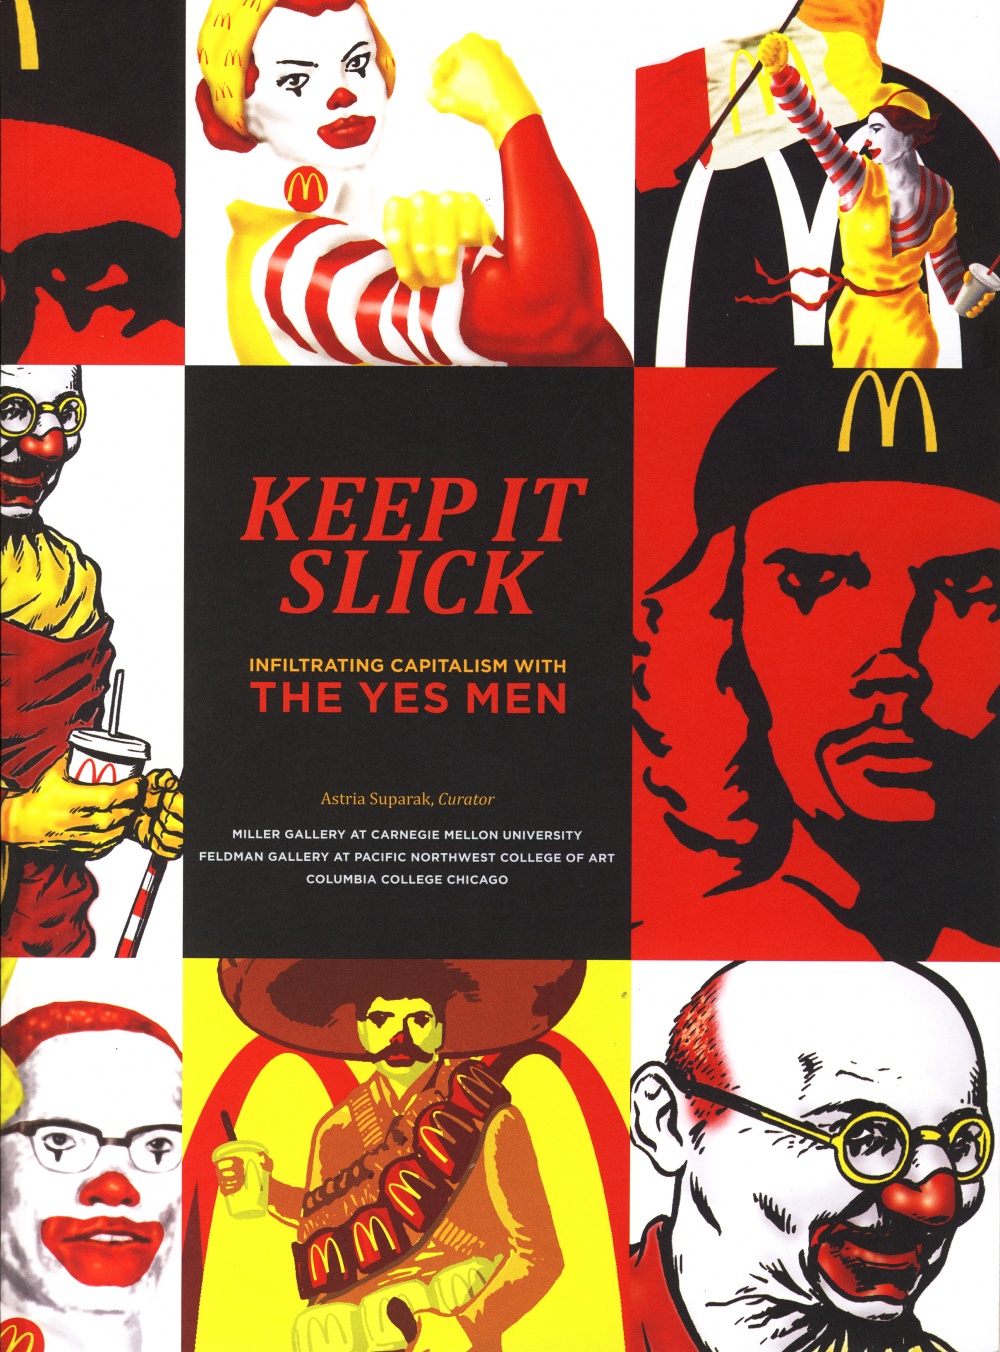 The Yes Men Activity Book (Keep it Slick)